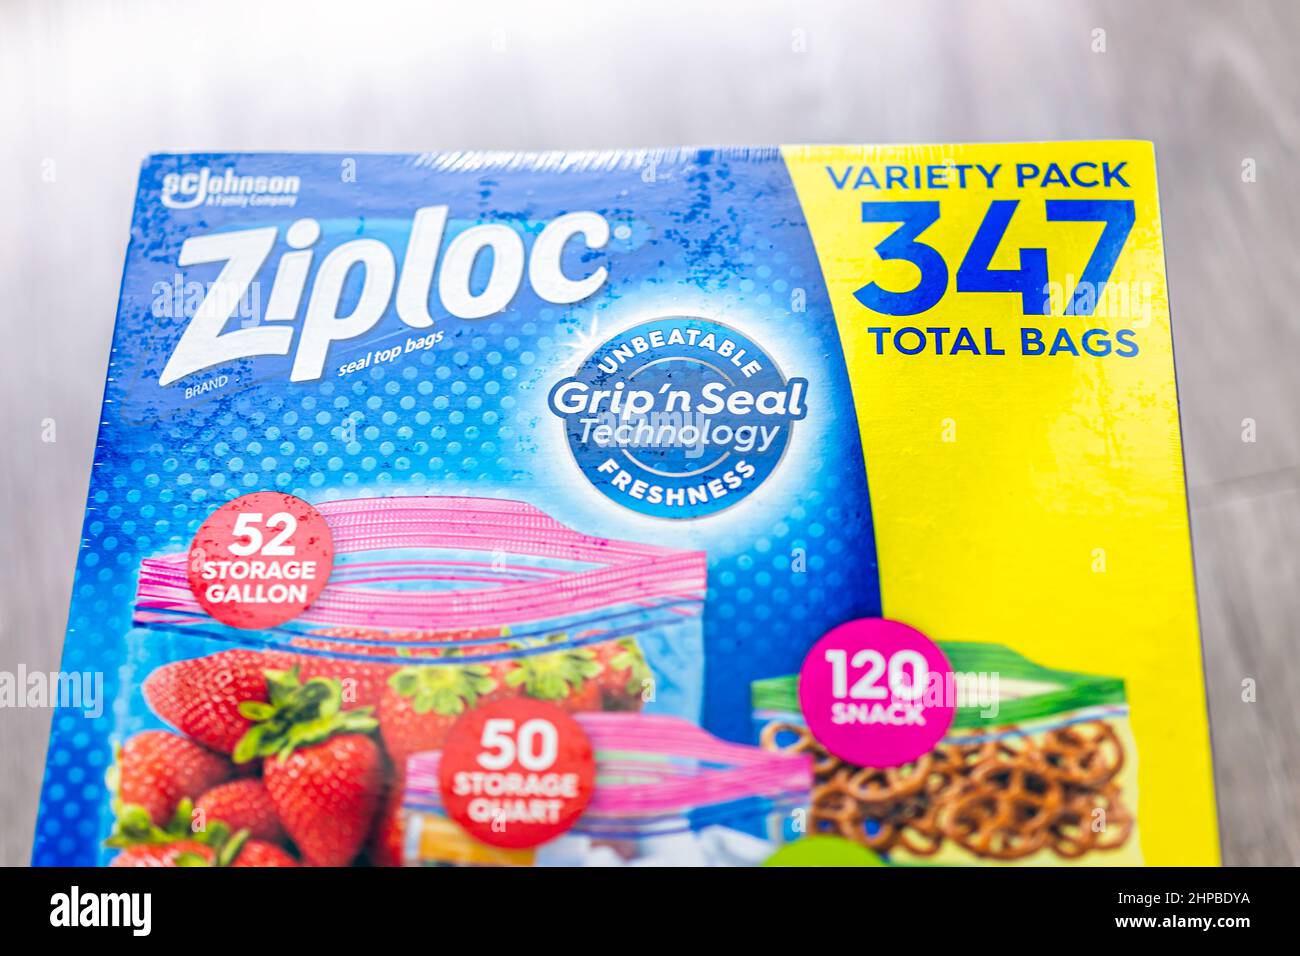 https://c8.alamy.com/comp/2HPBDYA/naples-usa-september-26-2021-sc-johnson-brand-sign-text-for-ziploc-product-for-grip-and-seal-bags-large-size-bought-at-costco-2HPBDYA.jpg